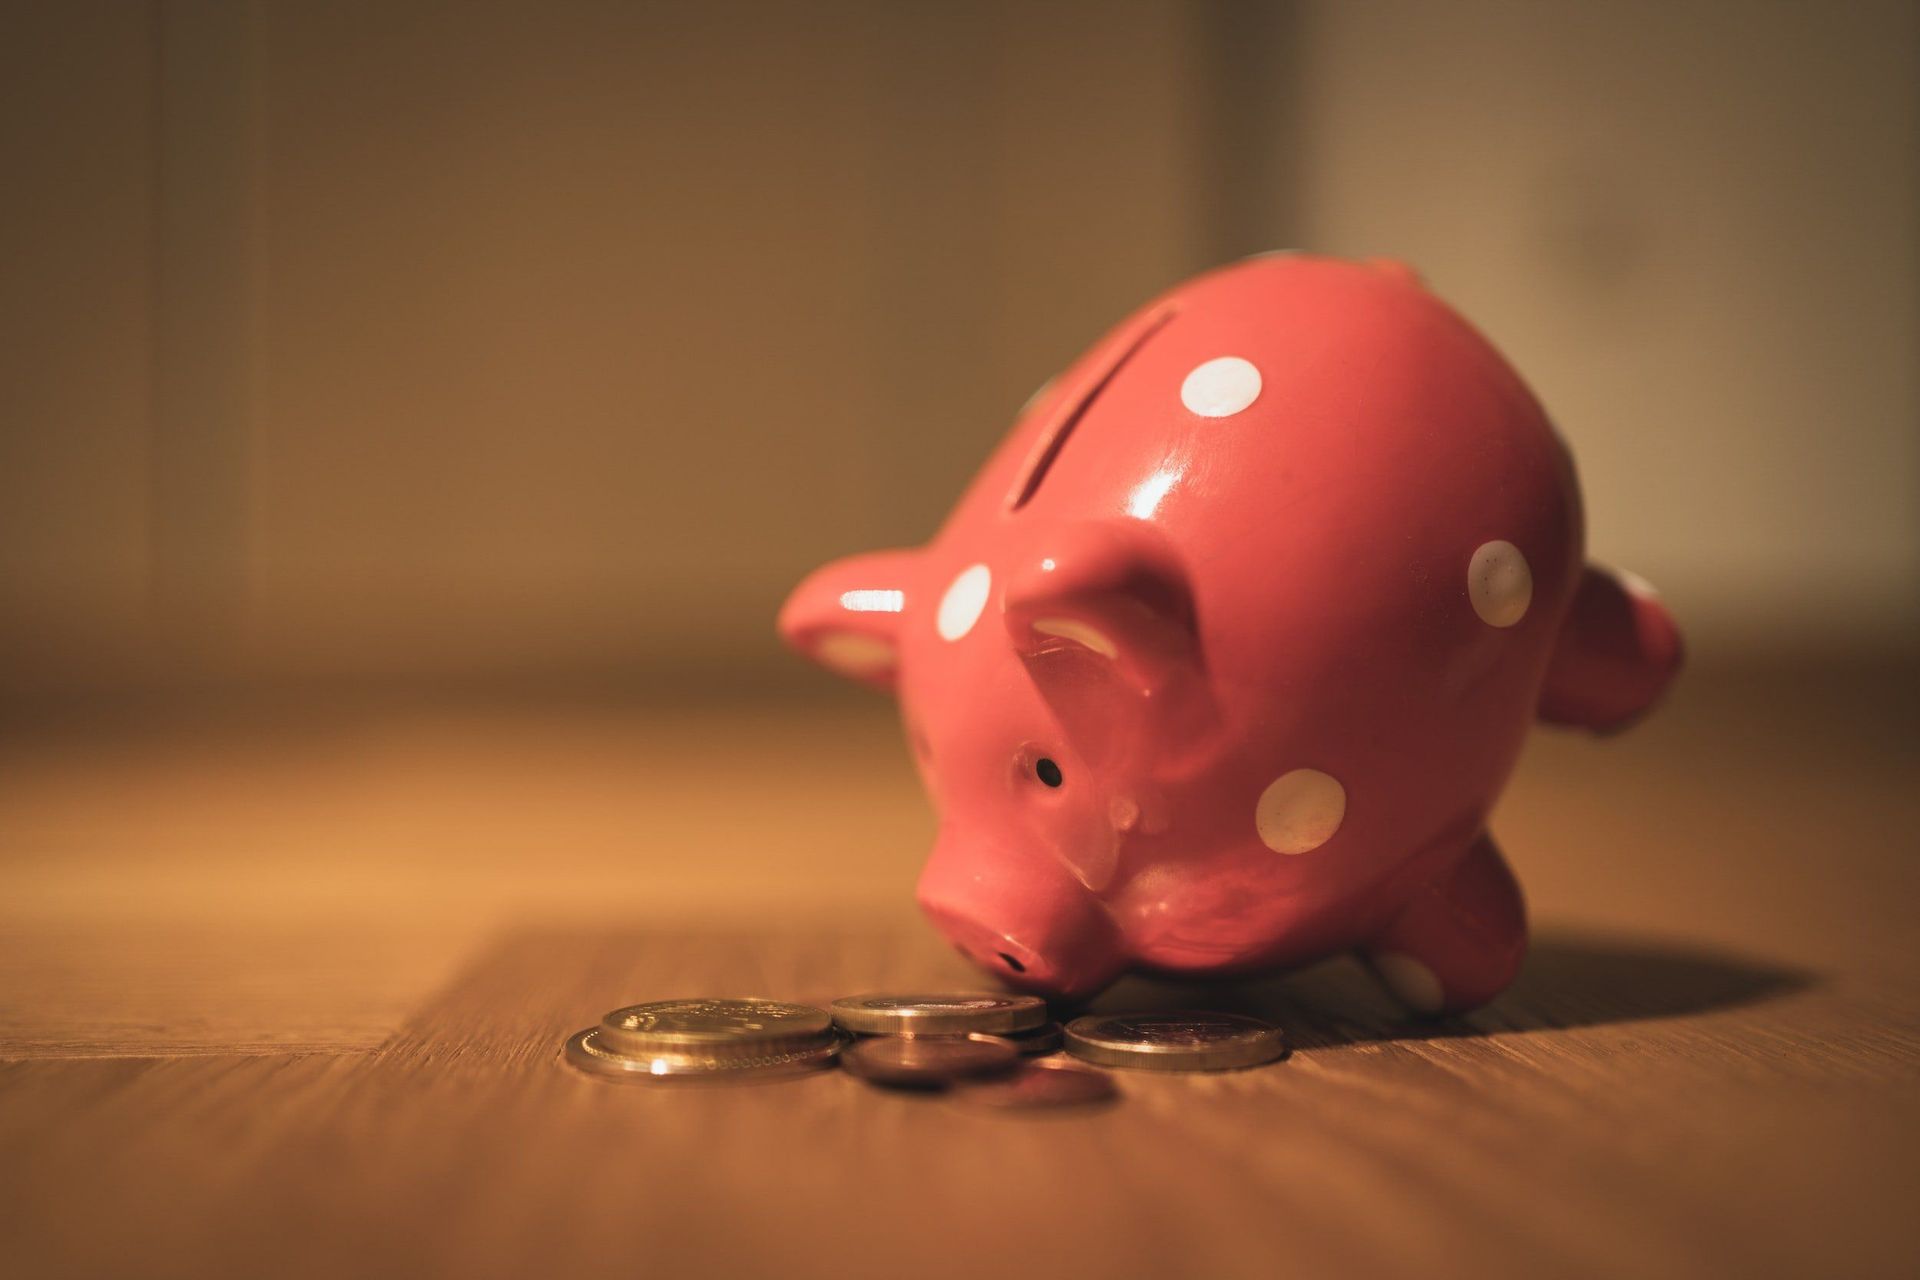 A red piggy bank is sitting on a wooden table next to a pile of coins.